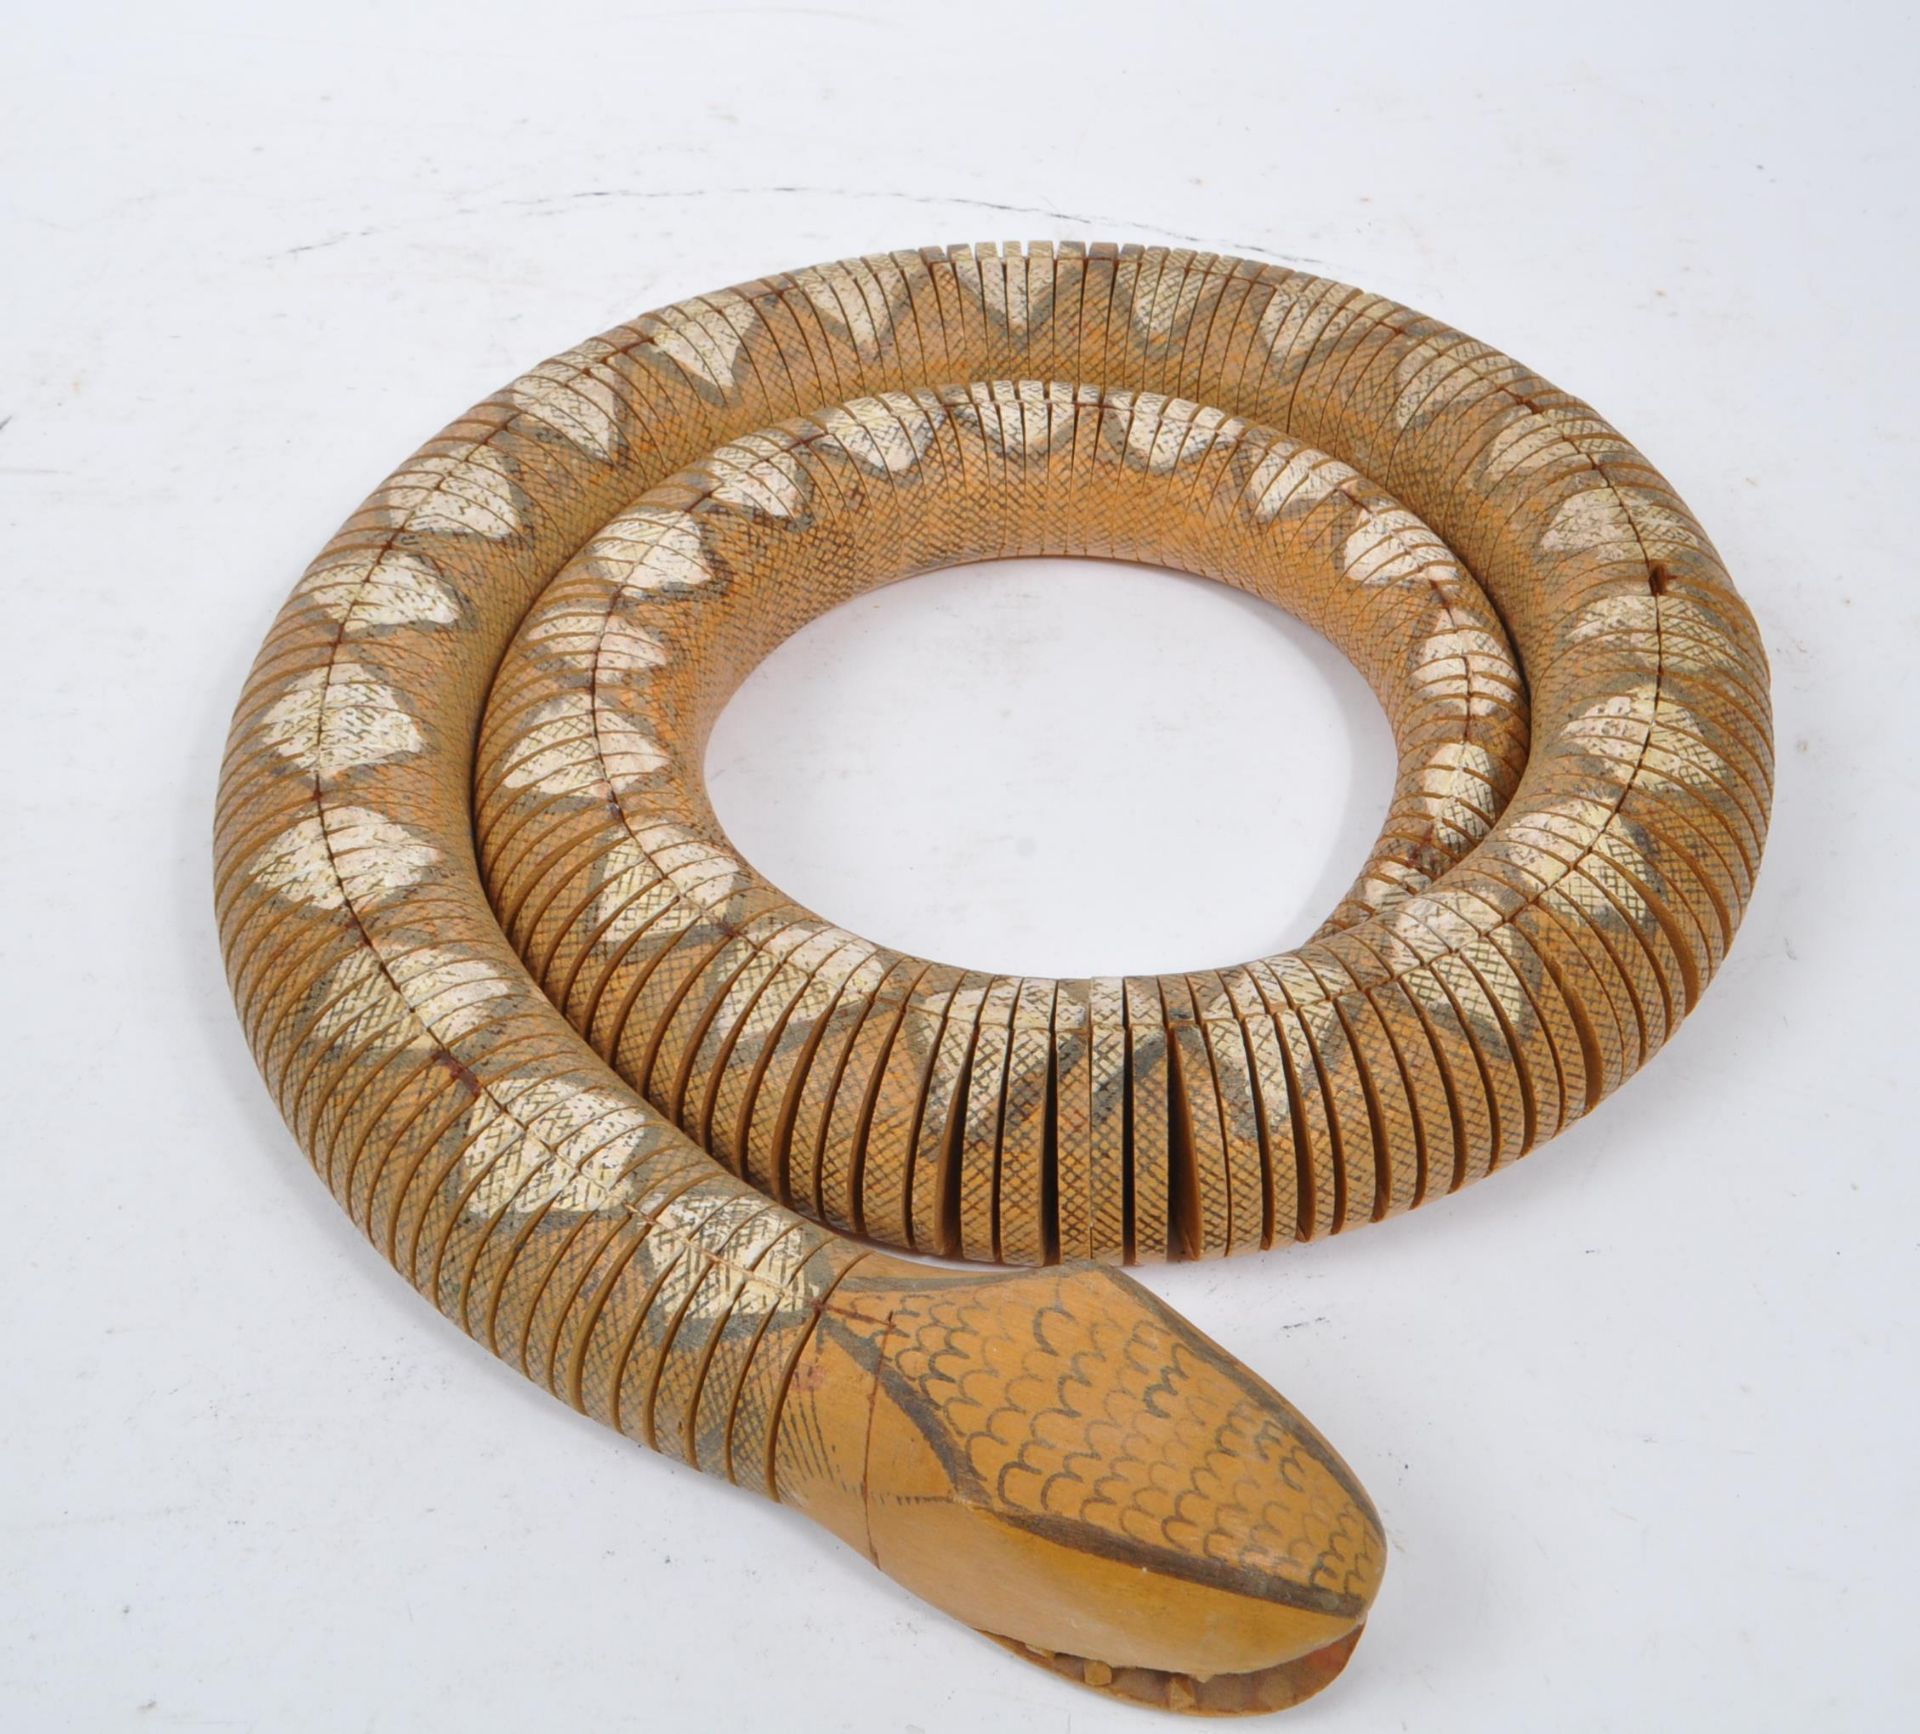 20TH CENTURY HAND PAINTED WOODEN ARTICULATED SNAKE - Image 4 of 5